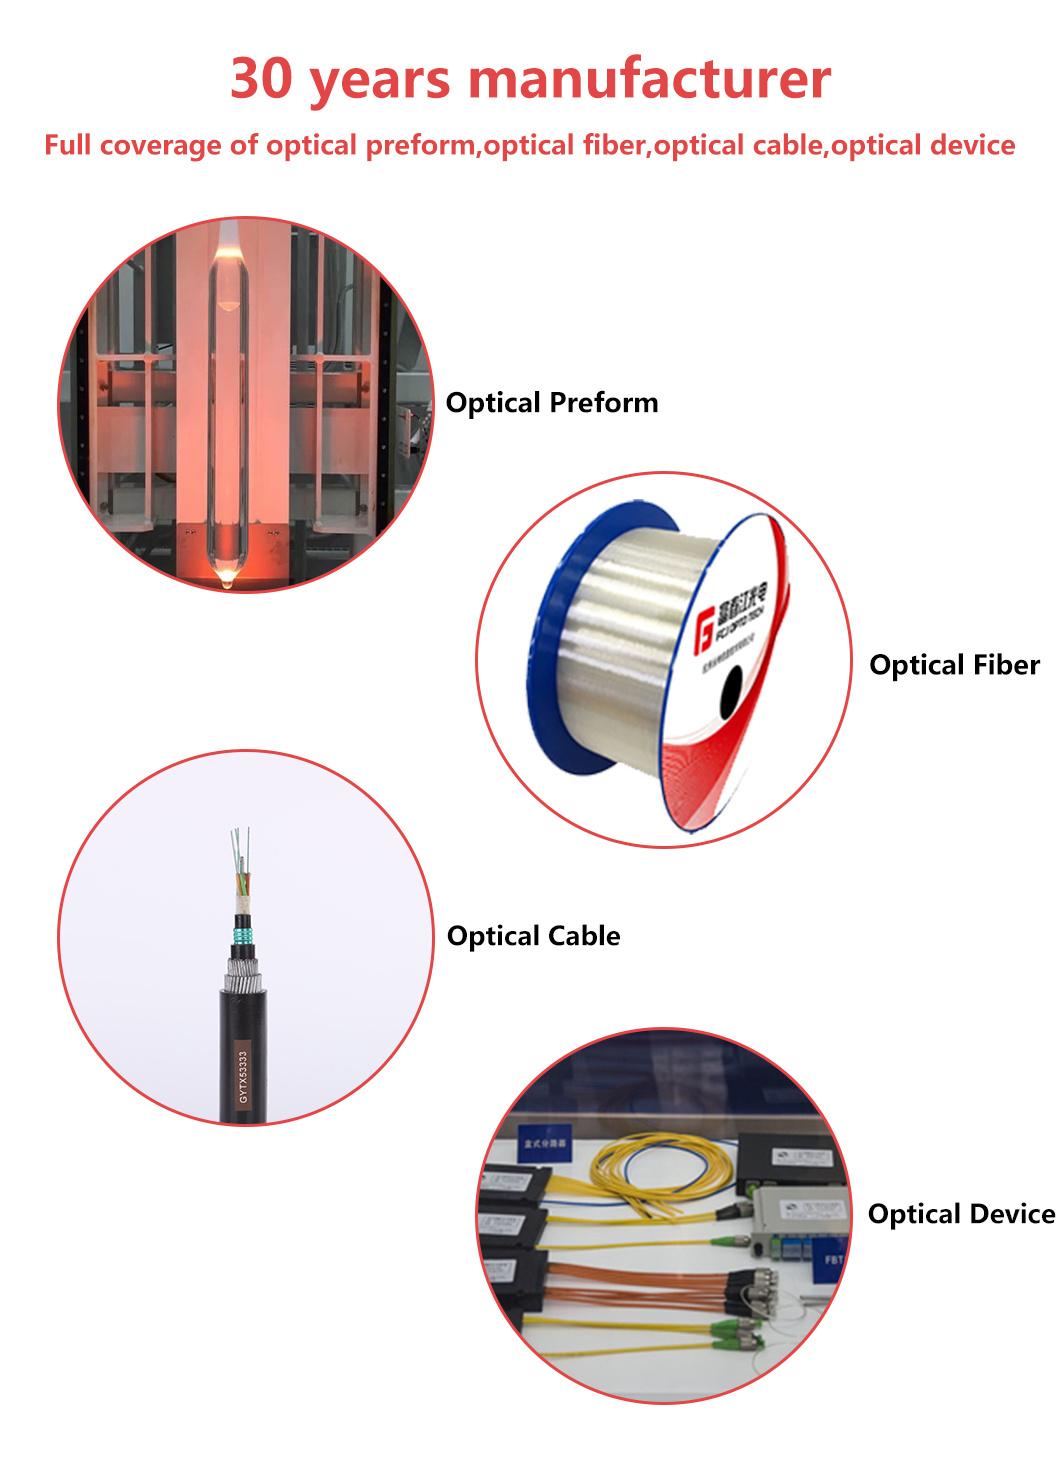 Fcj Group ADSS Fiber Optical Cable All-Dielectirc Self-Supporting Optic Fiber Cable